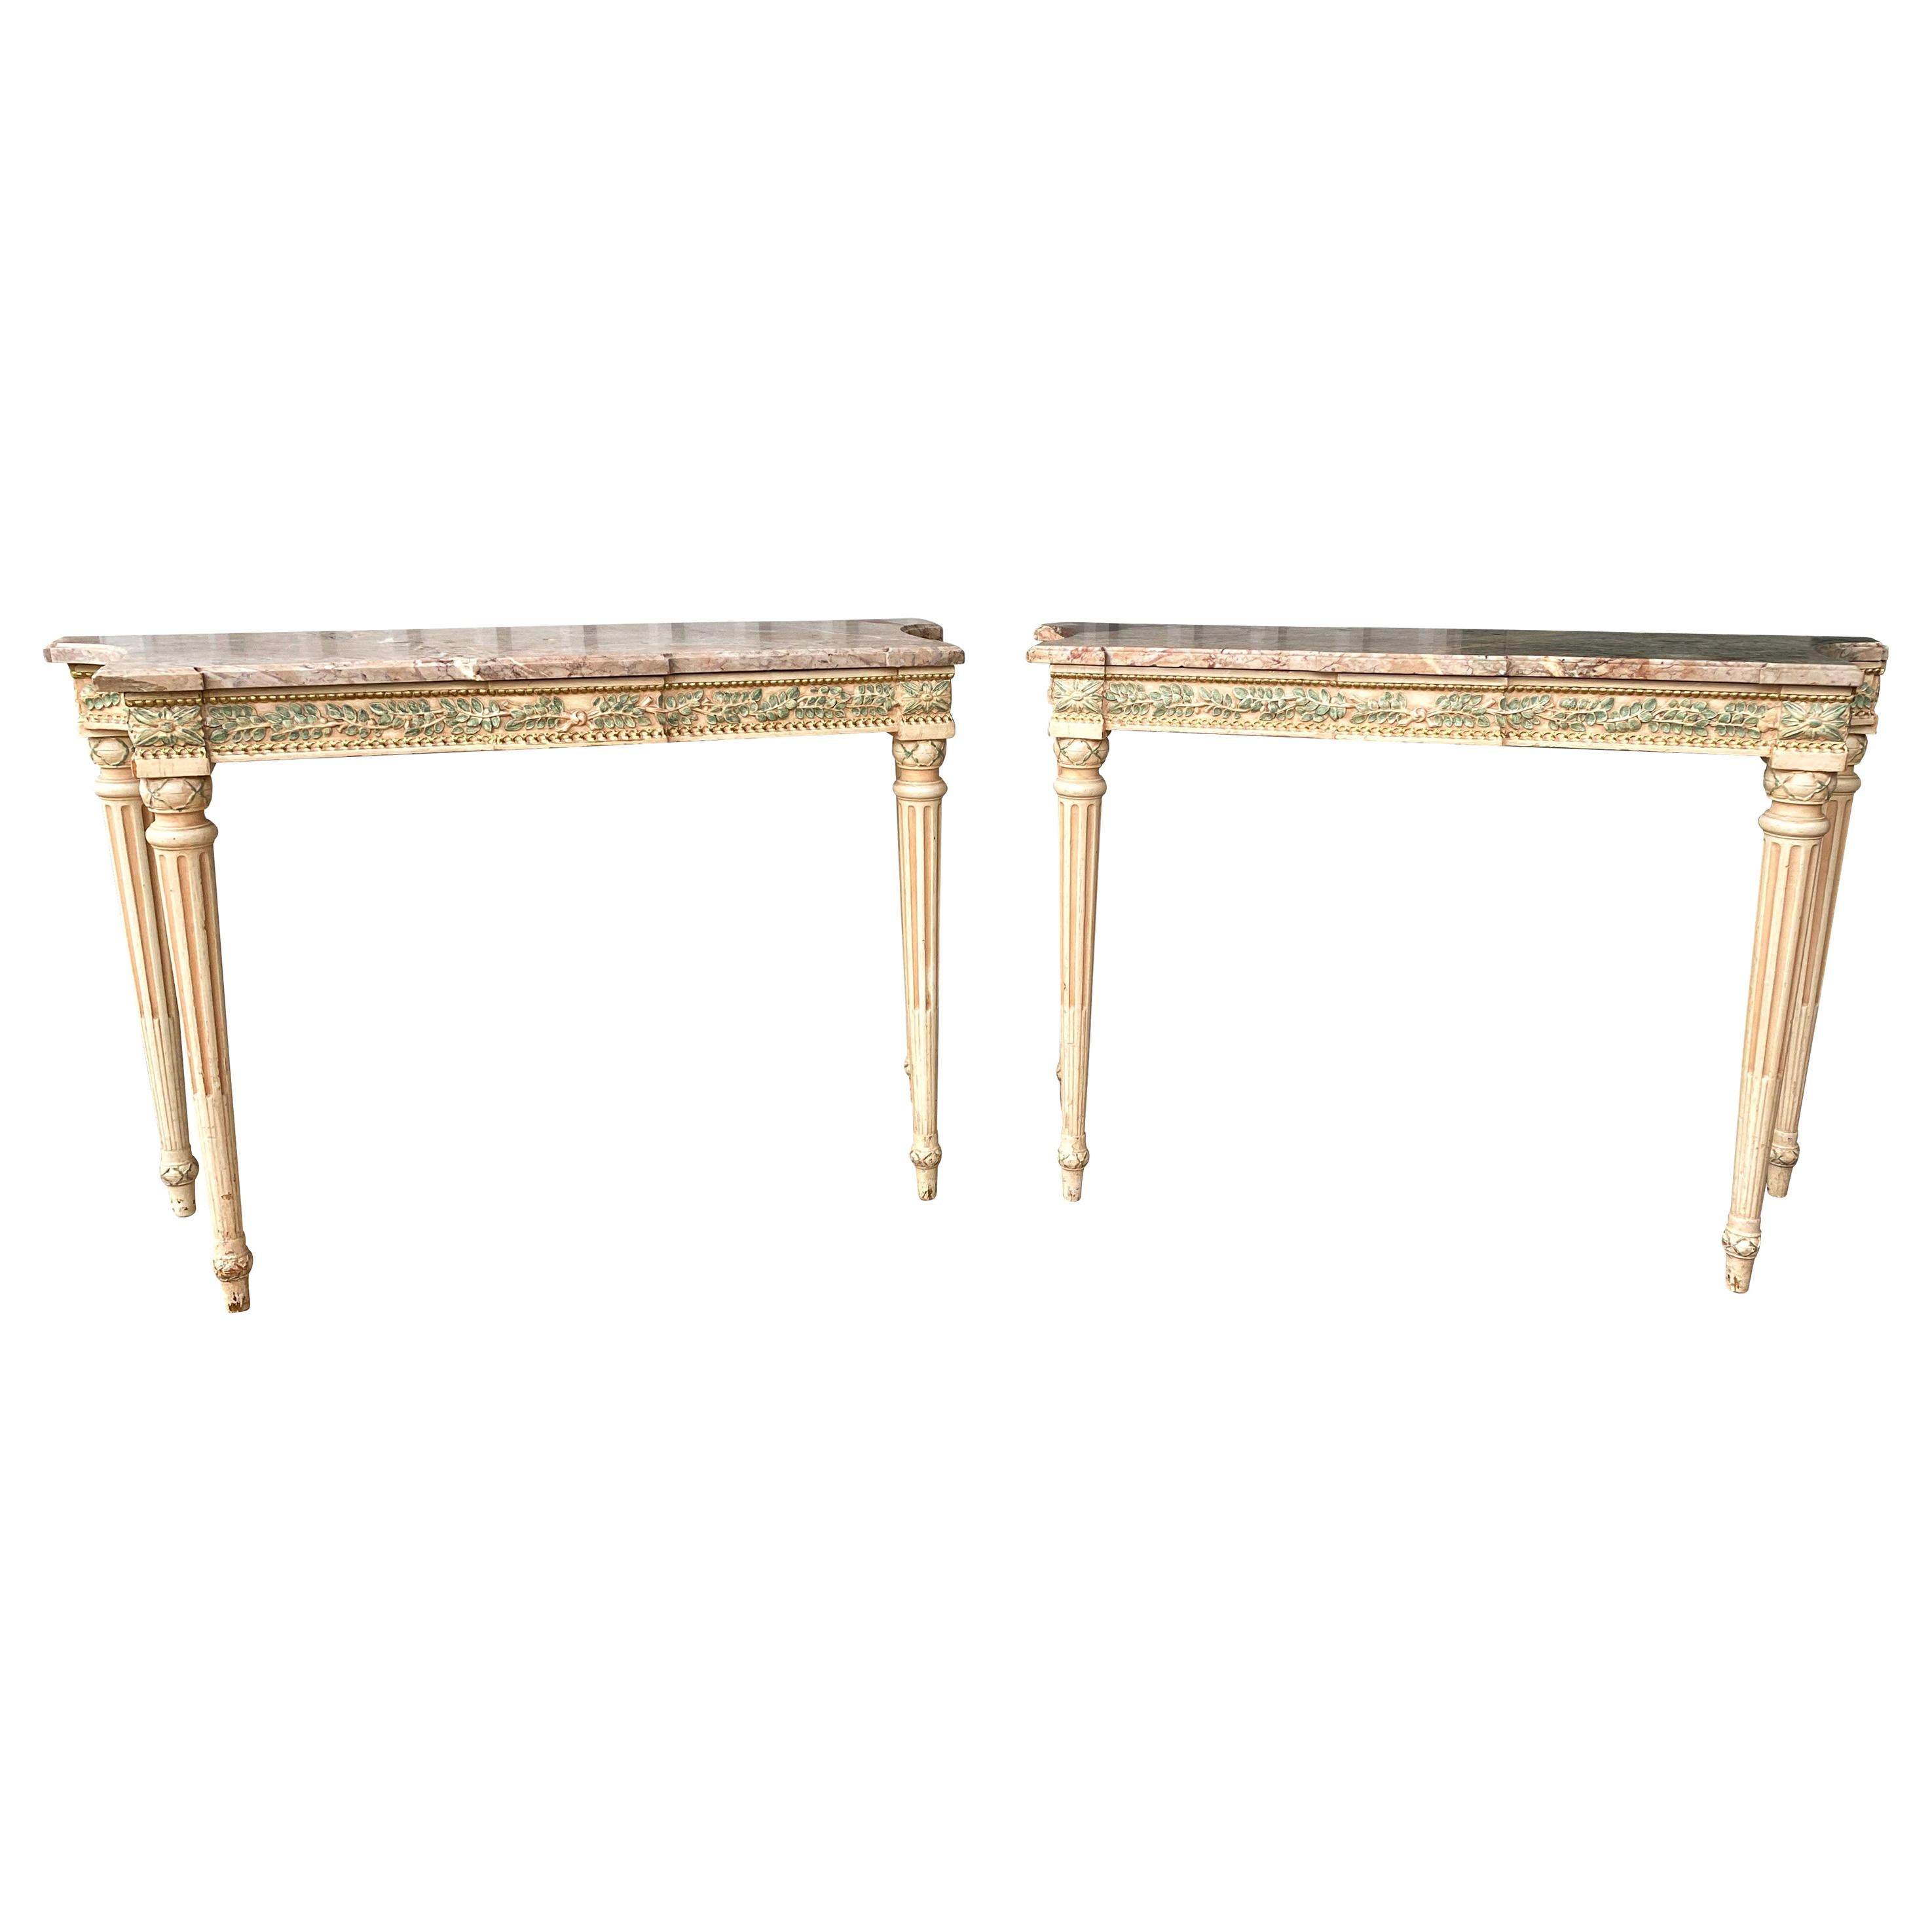 Pair of Maison Jansen Painted Marble-Top Console Tables